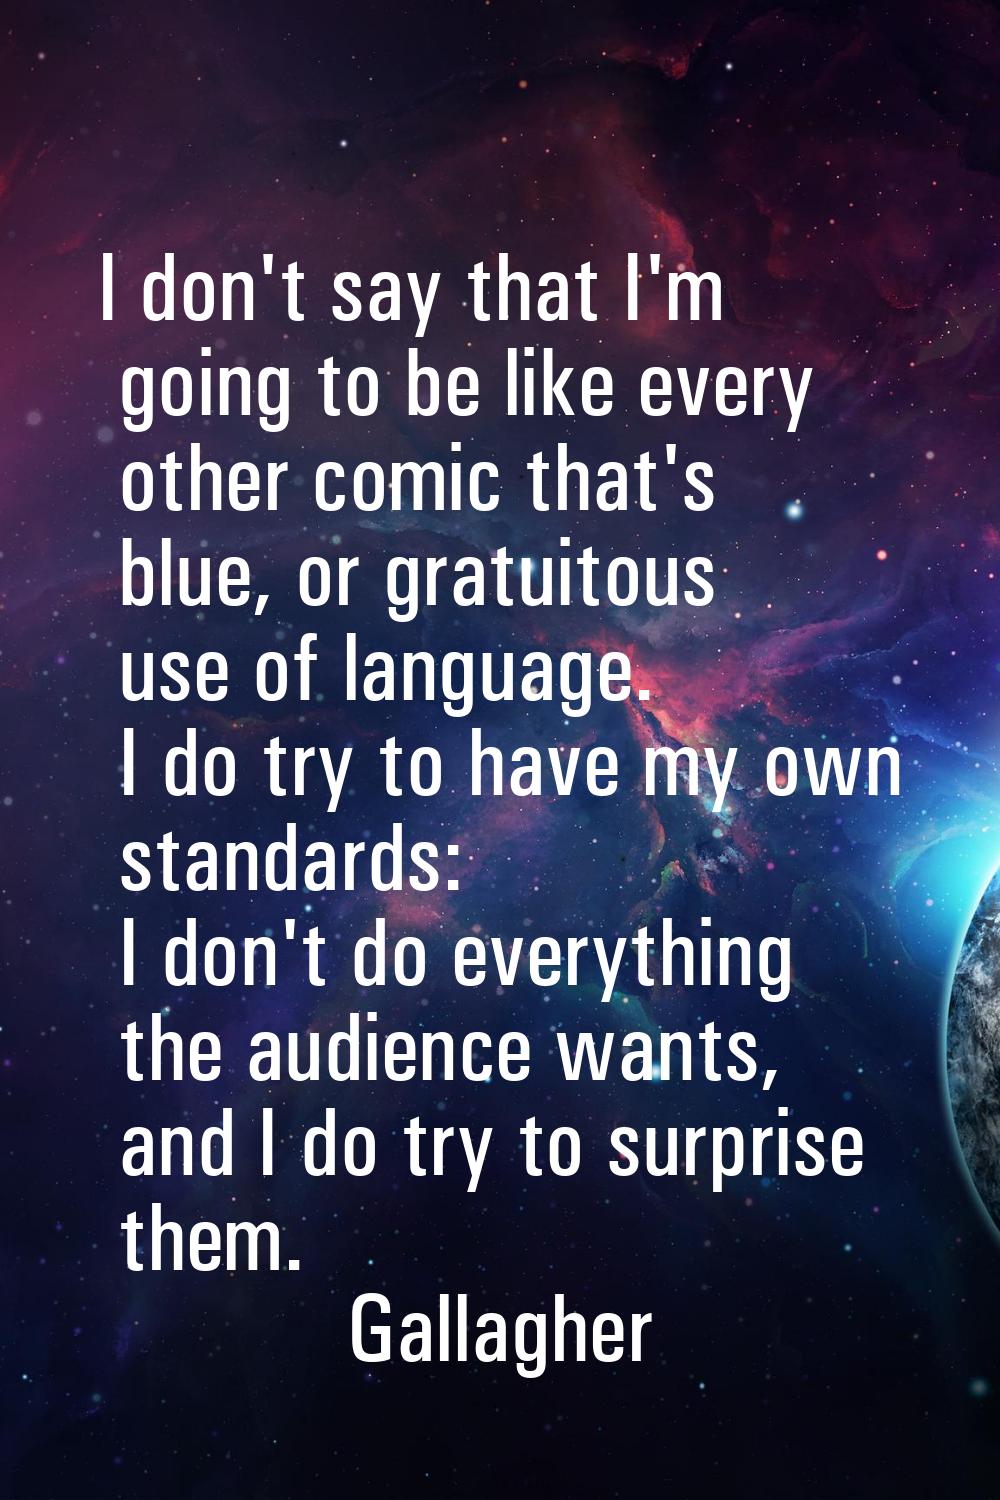 I don't say that I'm going to be like every other comic that's blue, or gratuitous use of language.